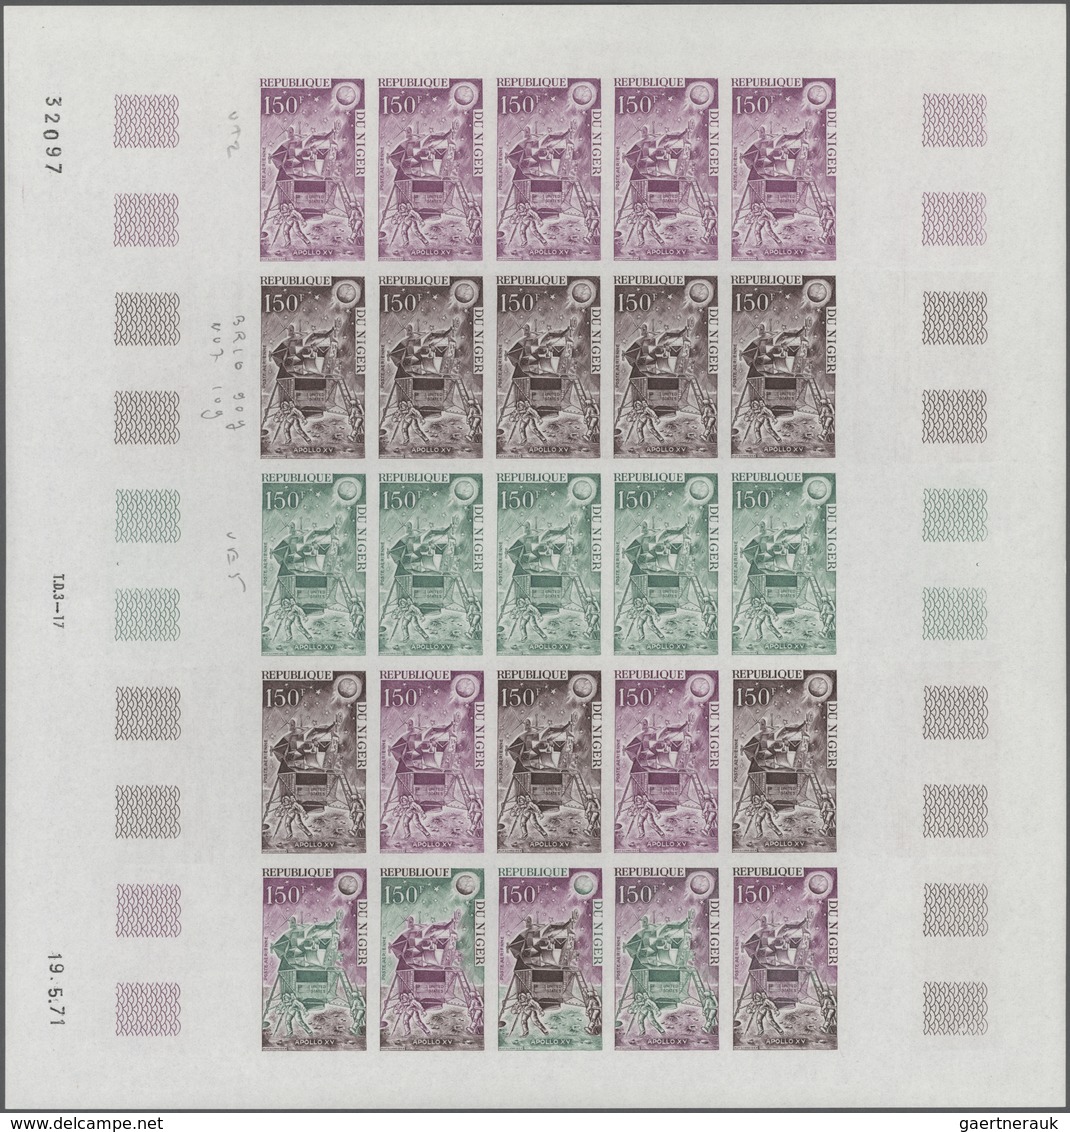 Niger: 1969/1978, IMPERFORATE COLOUR PROOFS, MNH collection of 105 complete sheets (=2.245 proofs),